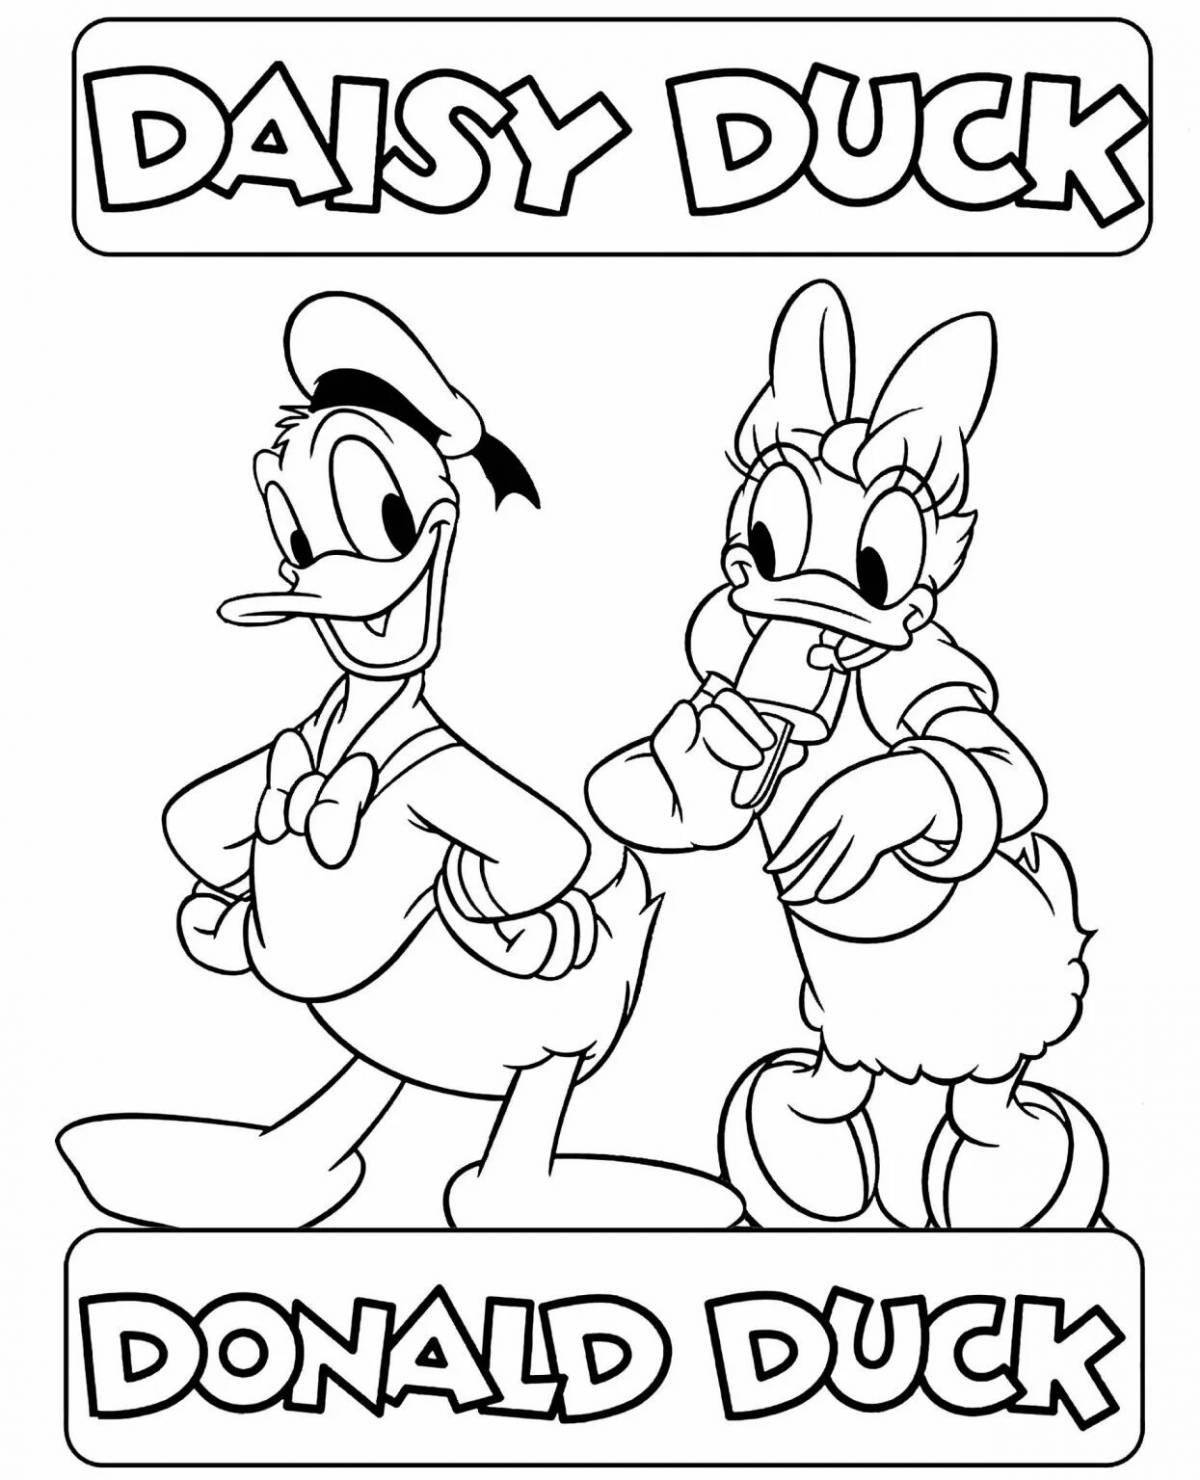 Donald duck with money #3